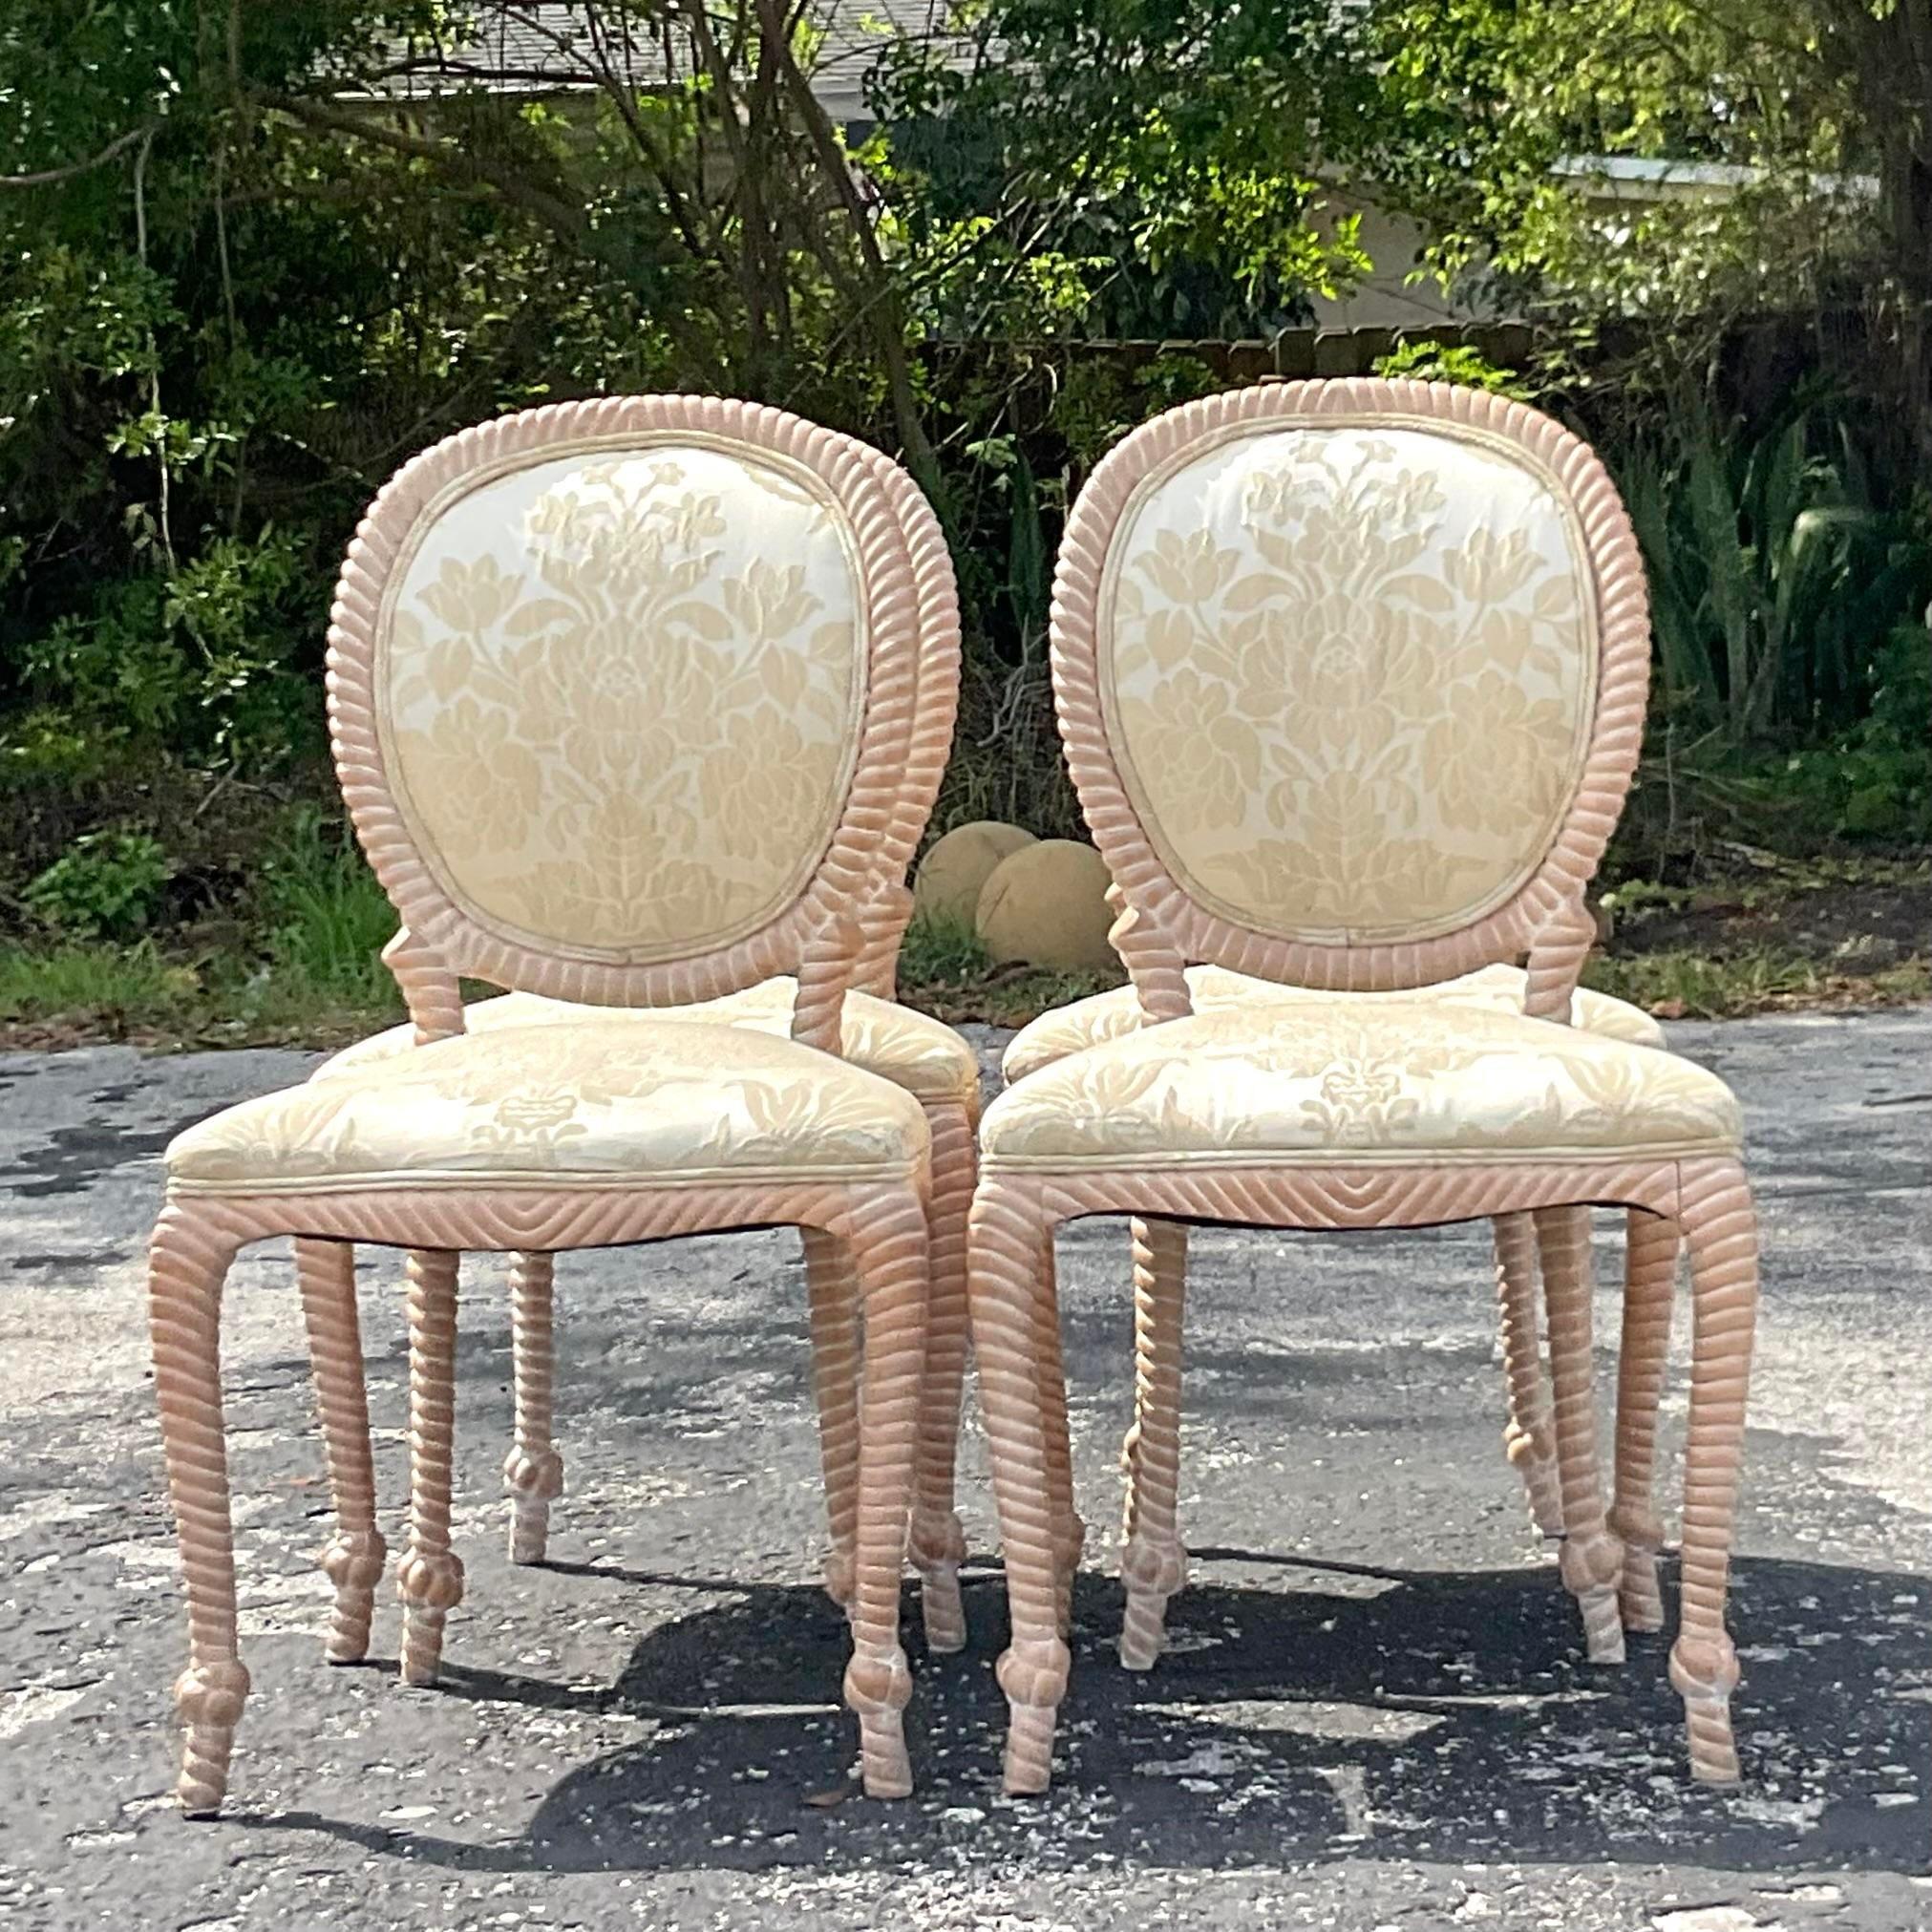 Invite coastal charm into your dining space with this set of 4 vintage carved rope dining chairs. Crafted with meticulous detail and sturdy construction, these chairs exude a timeless seaside elegance. Perfect for gatherings and everyday meals